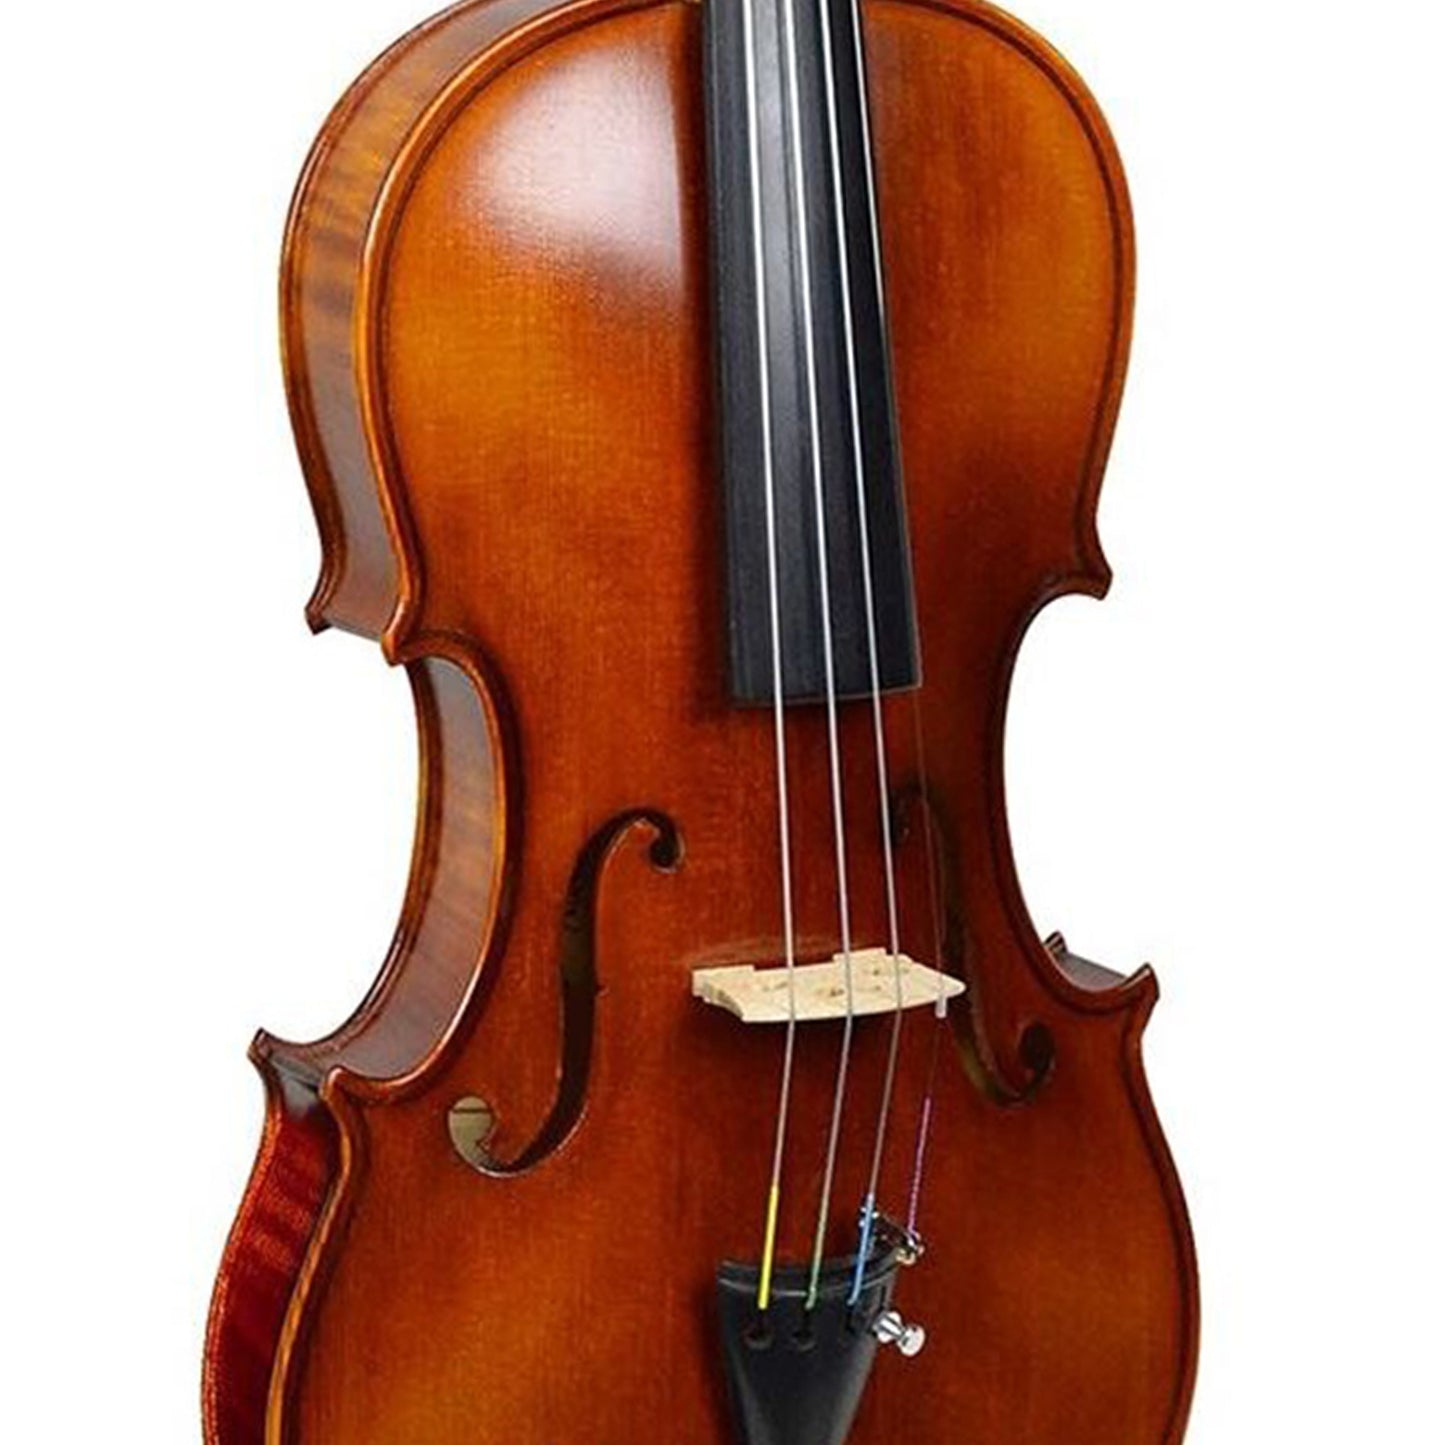 Hofner AS-045V Acoustic Violin Outfit 4/4 Set Kit with Bow and Hard Case for Professional and Student Musicians, Intermediate Players